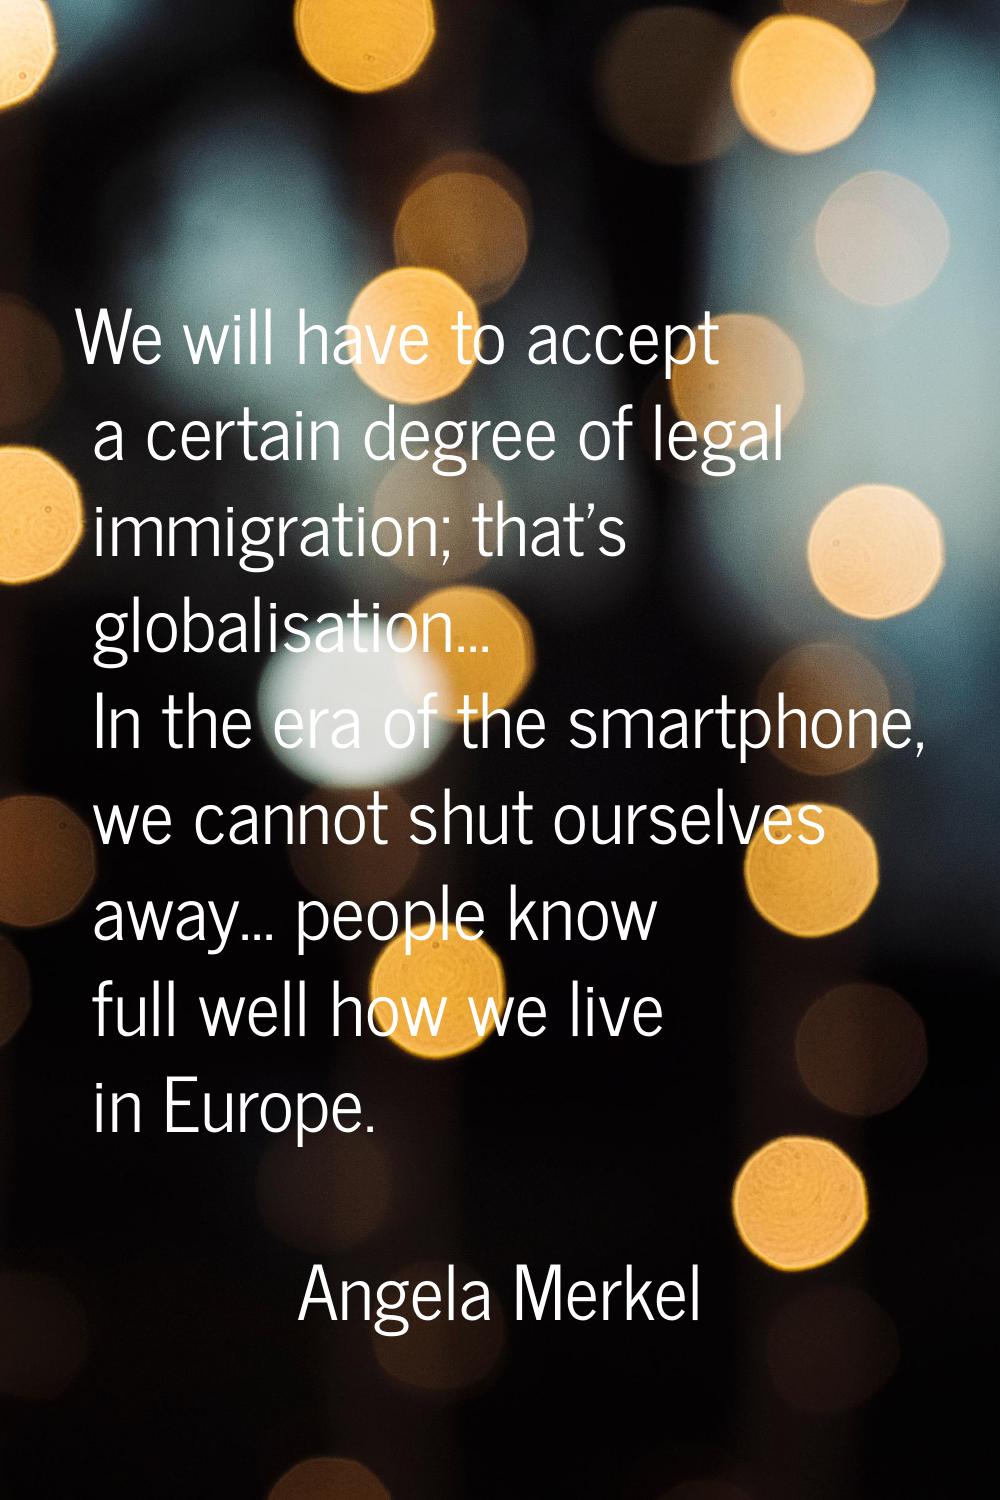 We will have to accept a certain degree of legal immigration; that's globalisation... In the era of